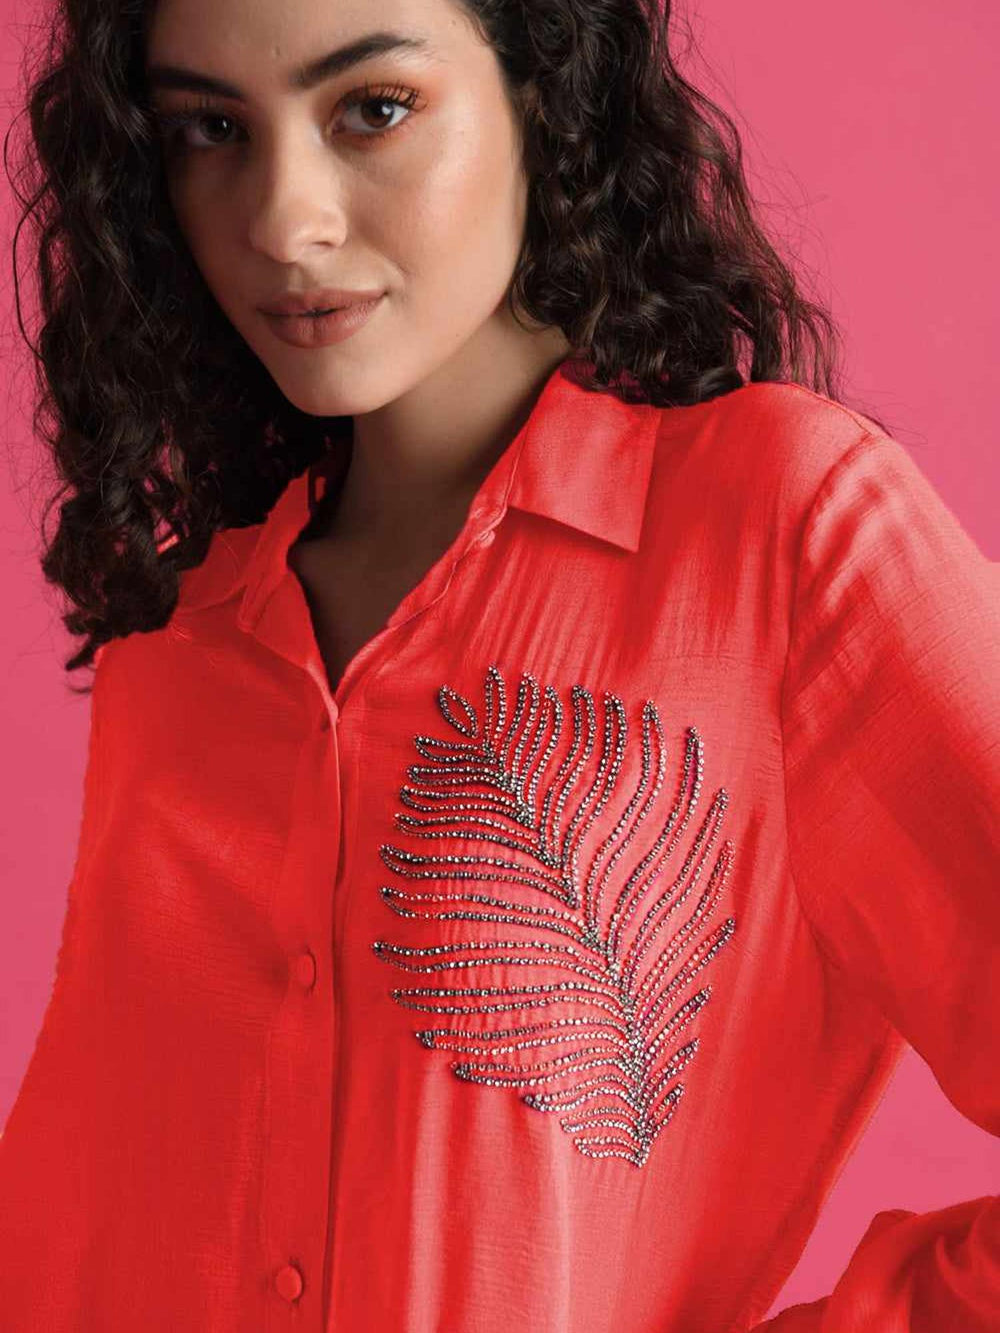 deluxe embellished fuchsia red shirt